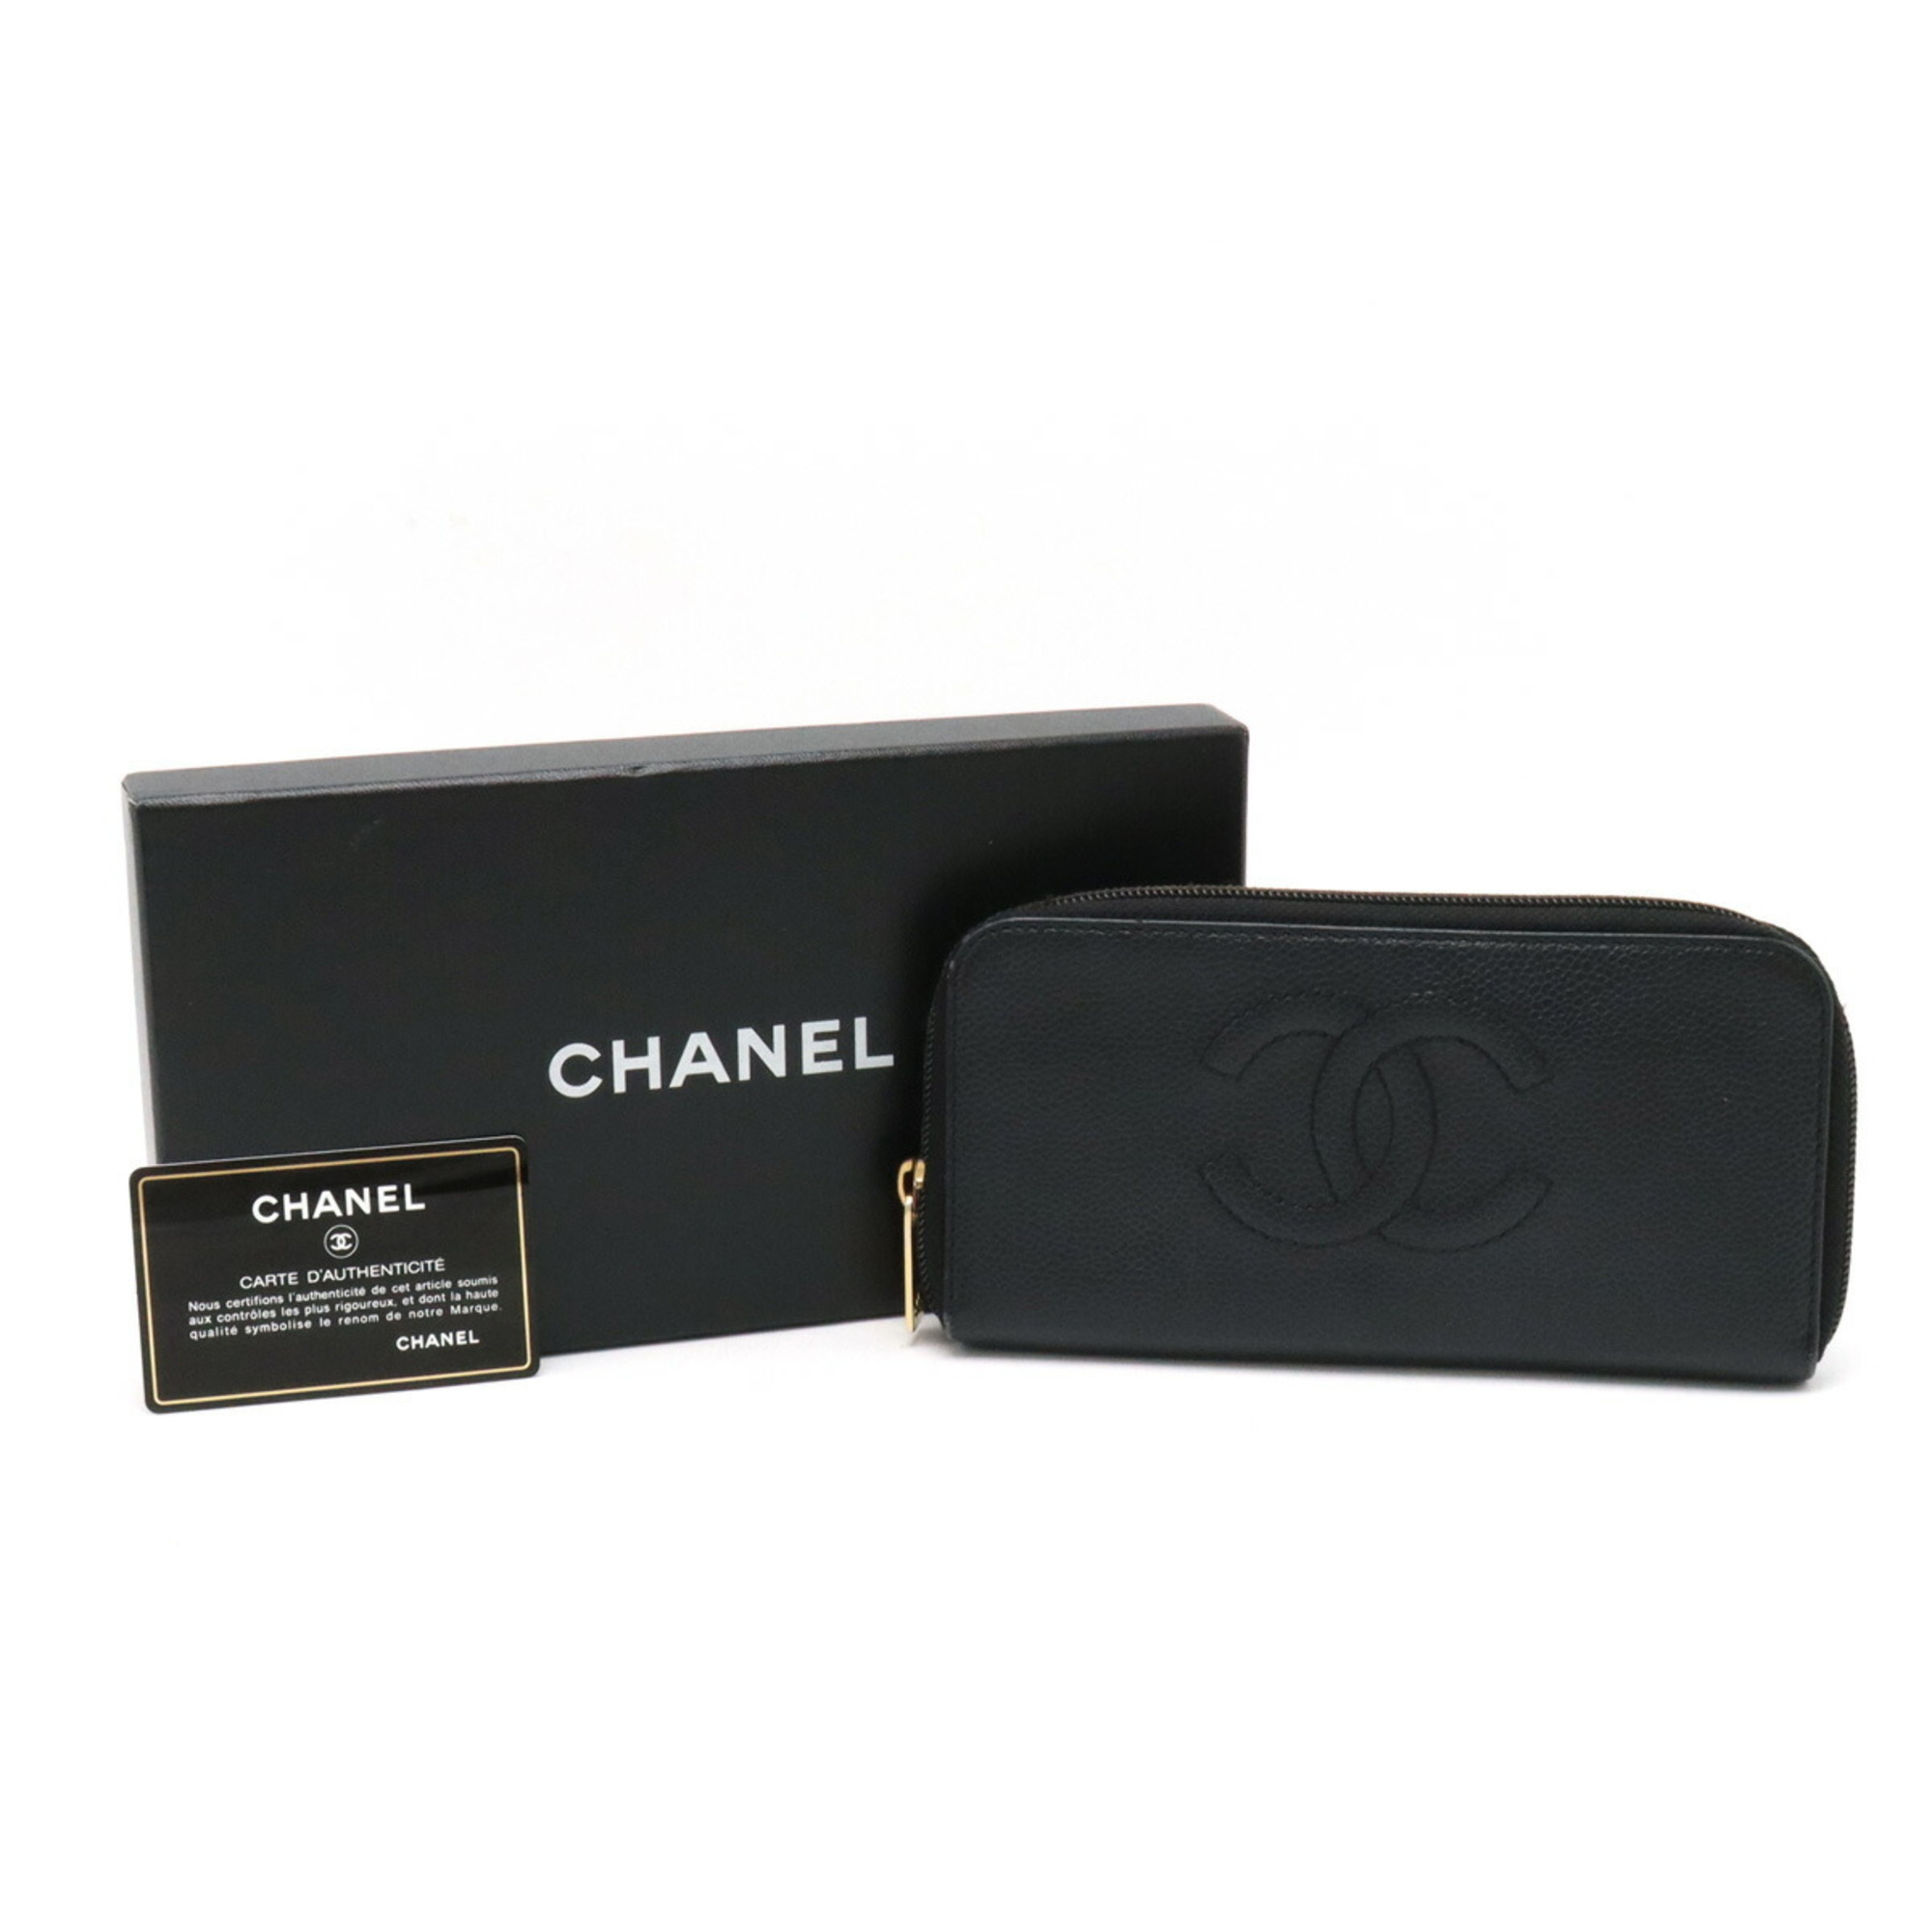 CHANEL Caviar Skin Coco Mark Round Long Wallet Leather Black A13228